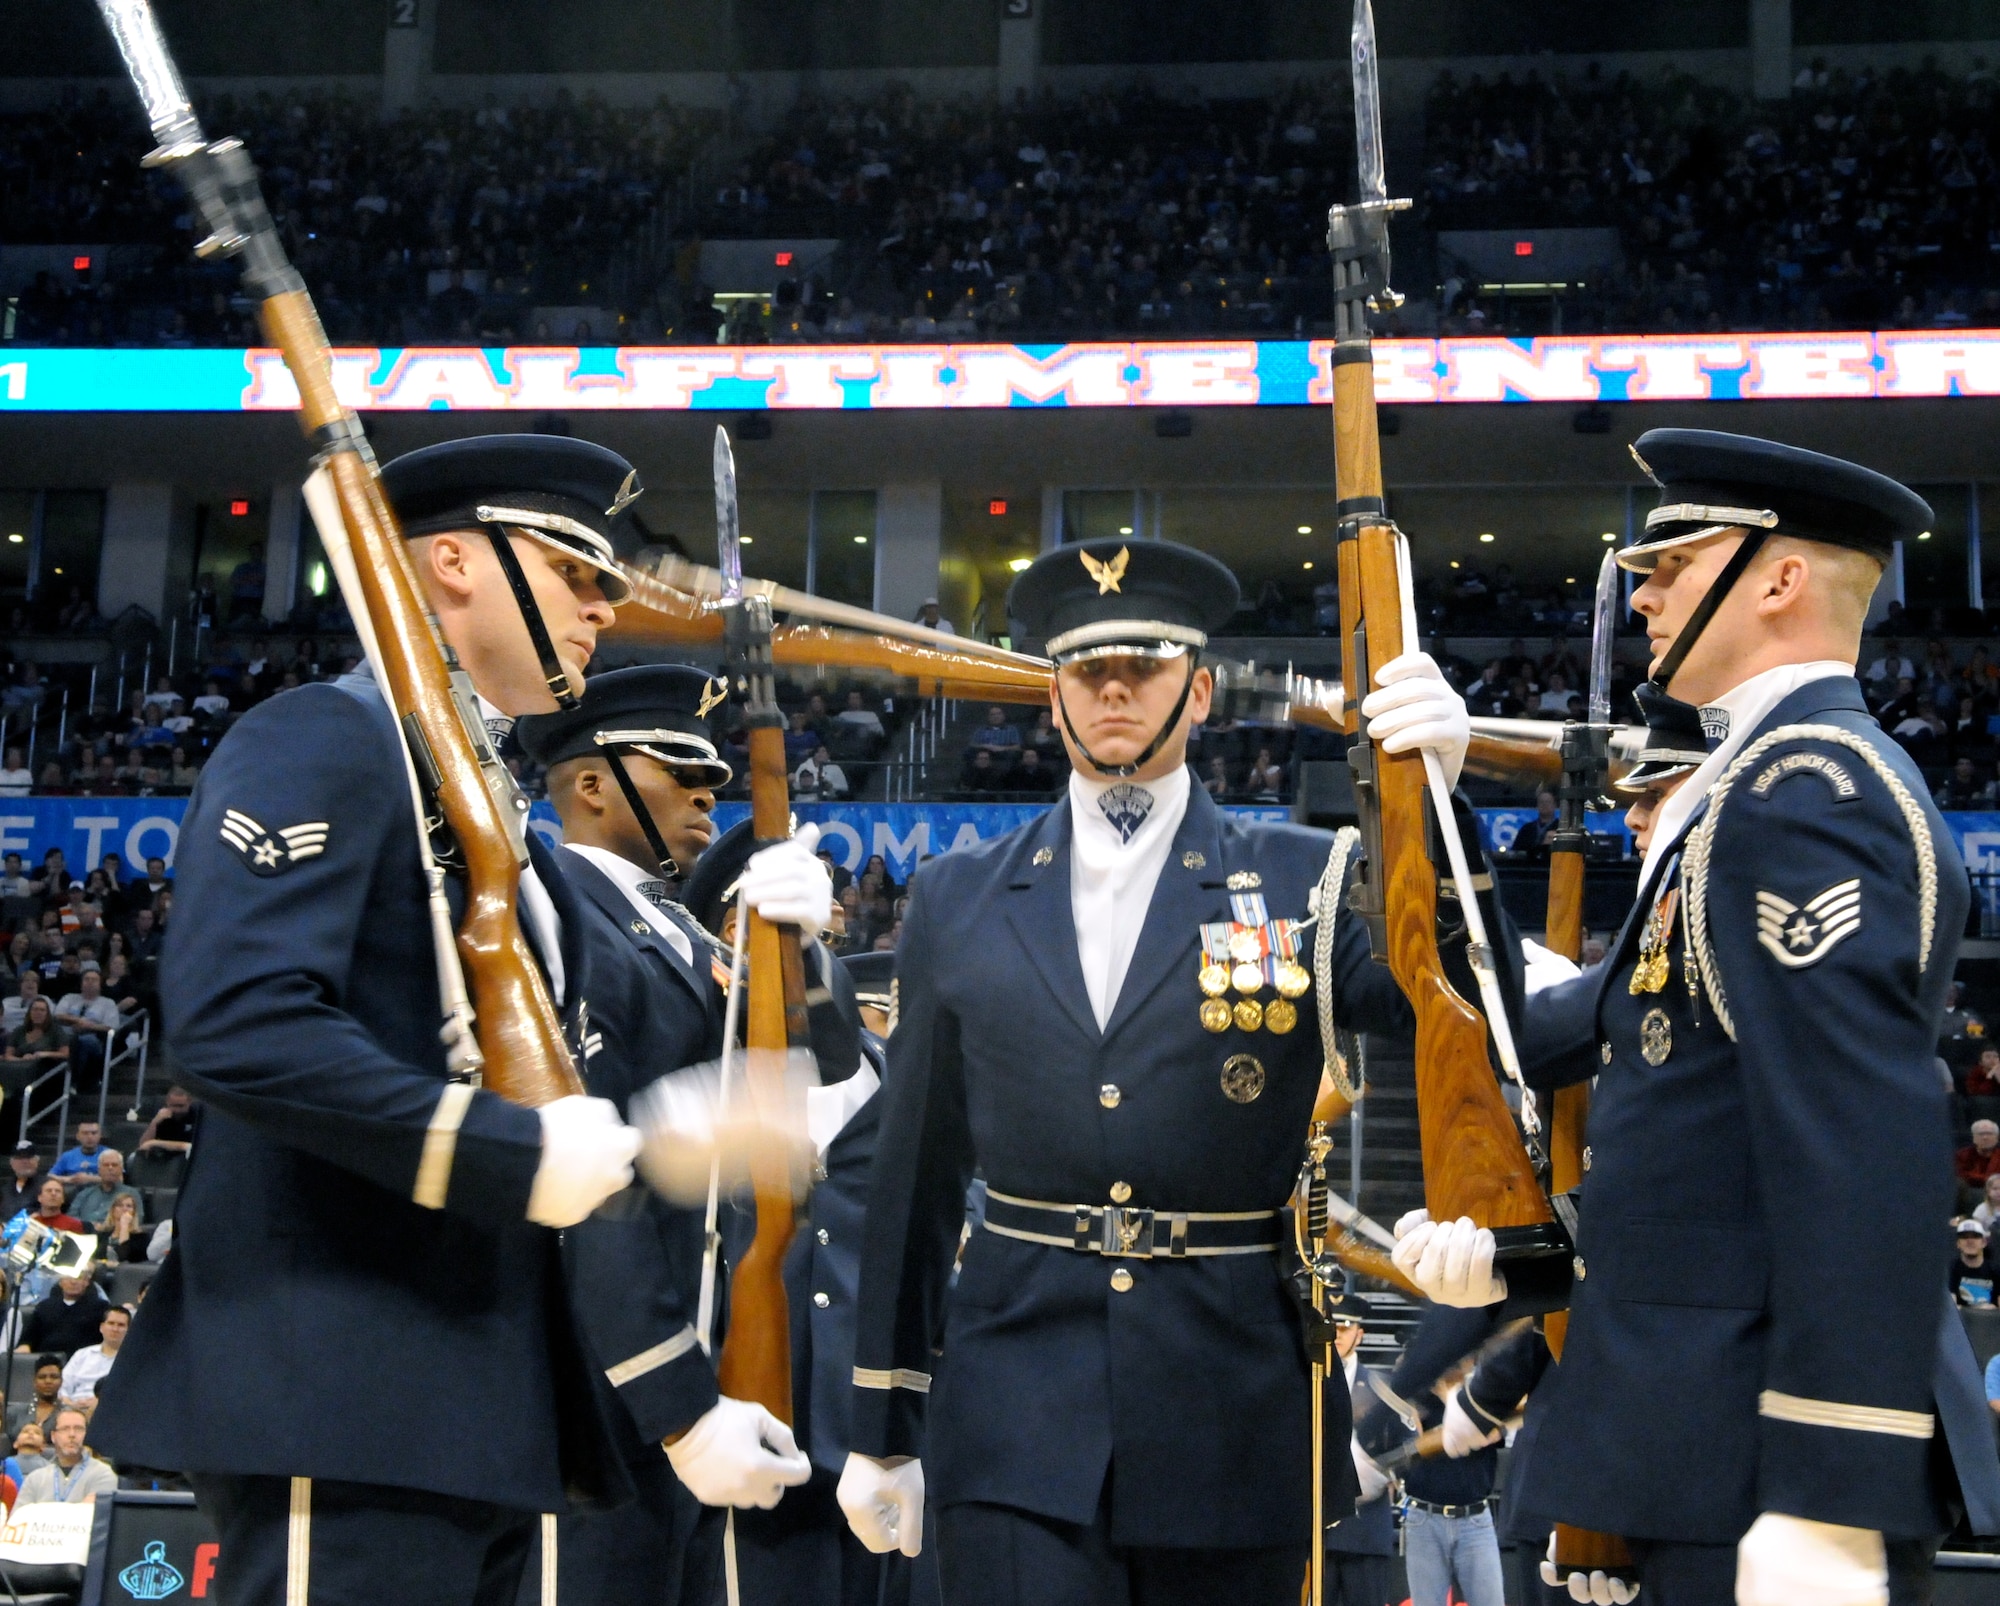 Tech. Sgt. Michael Doss, member of The U.S. Air Force Honor Guard drill team, walks through the line of twirling M-1 rifles during a performance Feb. 15 at the Oklahoma City Thunder’s military appreciation night. The performance is Sergeant Doss’ final performance with drill team. (U.S. Air Force photo by Airman 1st Class Tabitha N. Haynes)